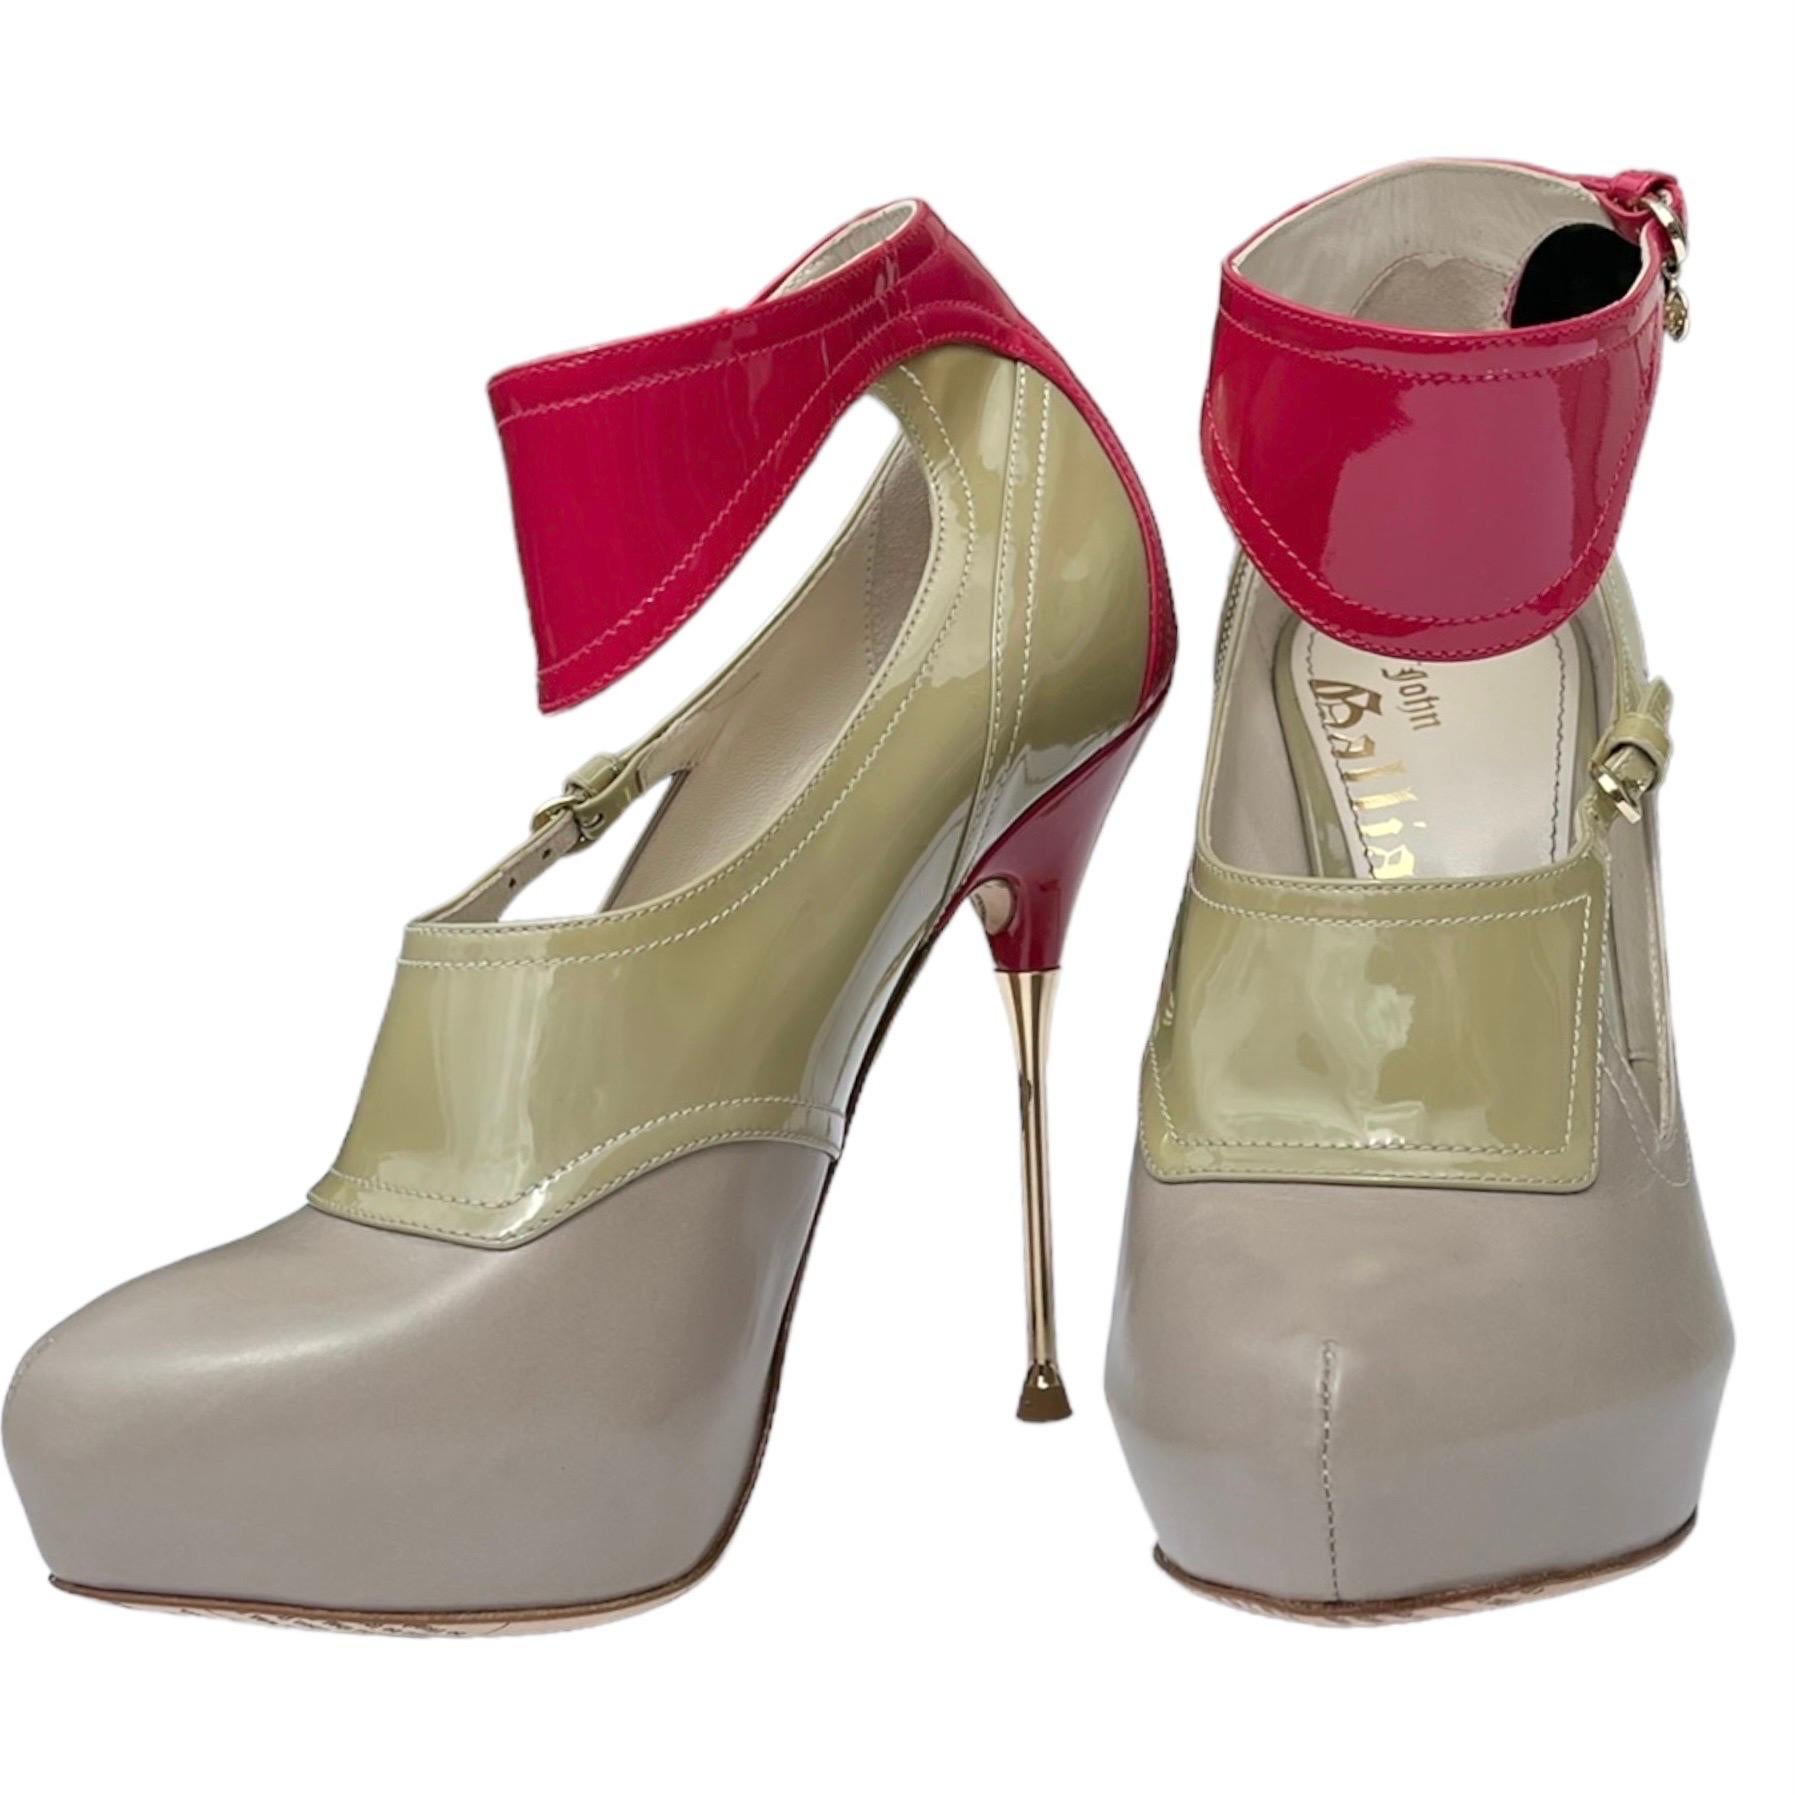 John Galliano Nude/Pink Platform & Stiletto Heel Shoes 36.5 NWT In New Condition For Sale In Montgomery, TX